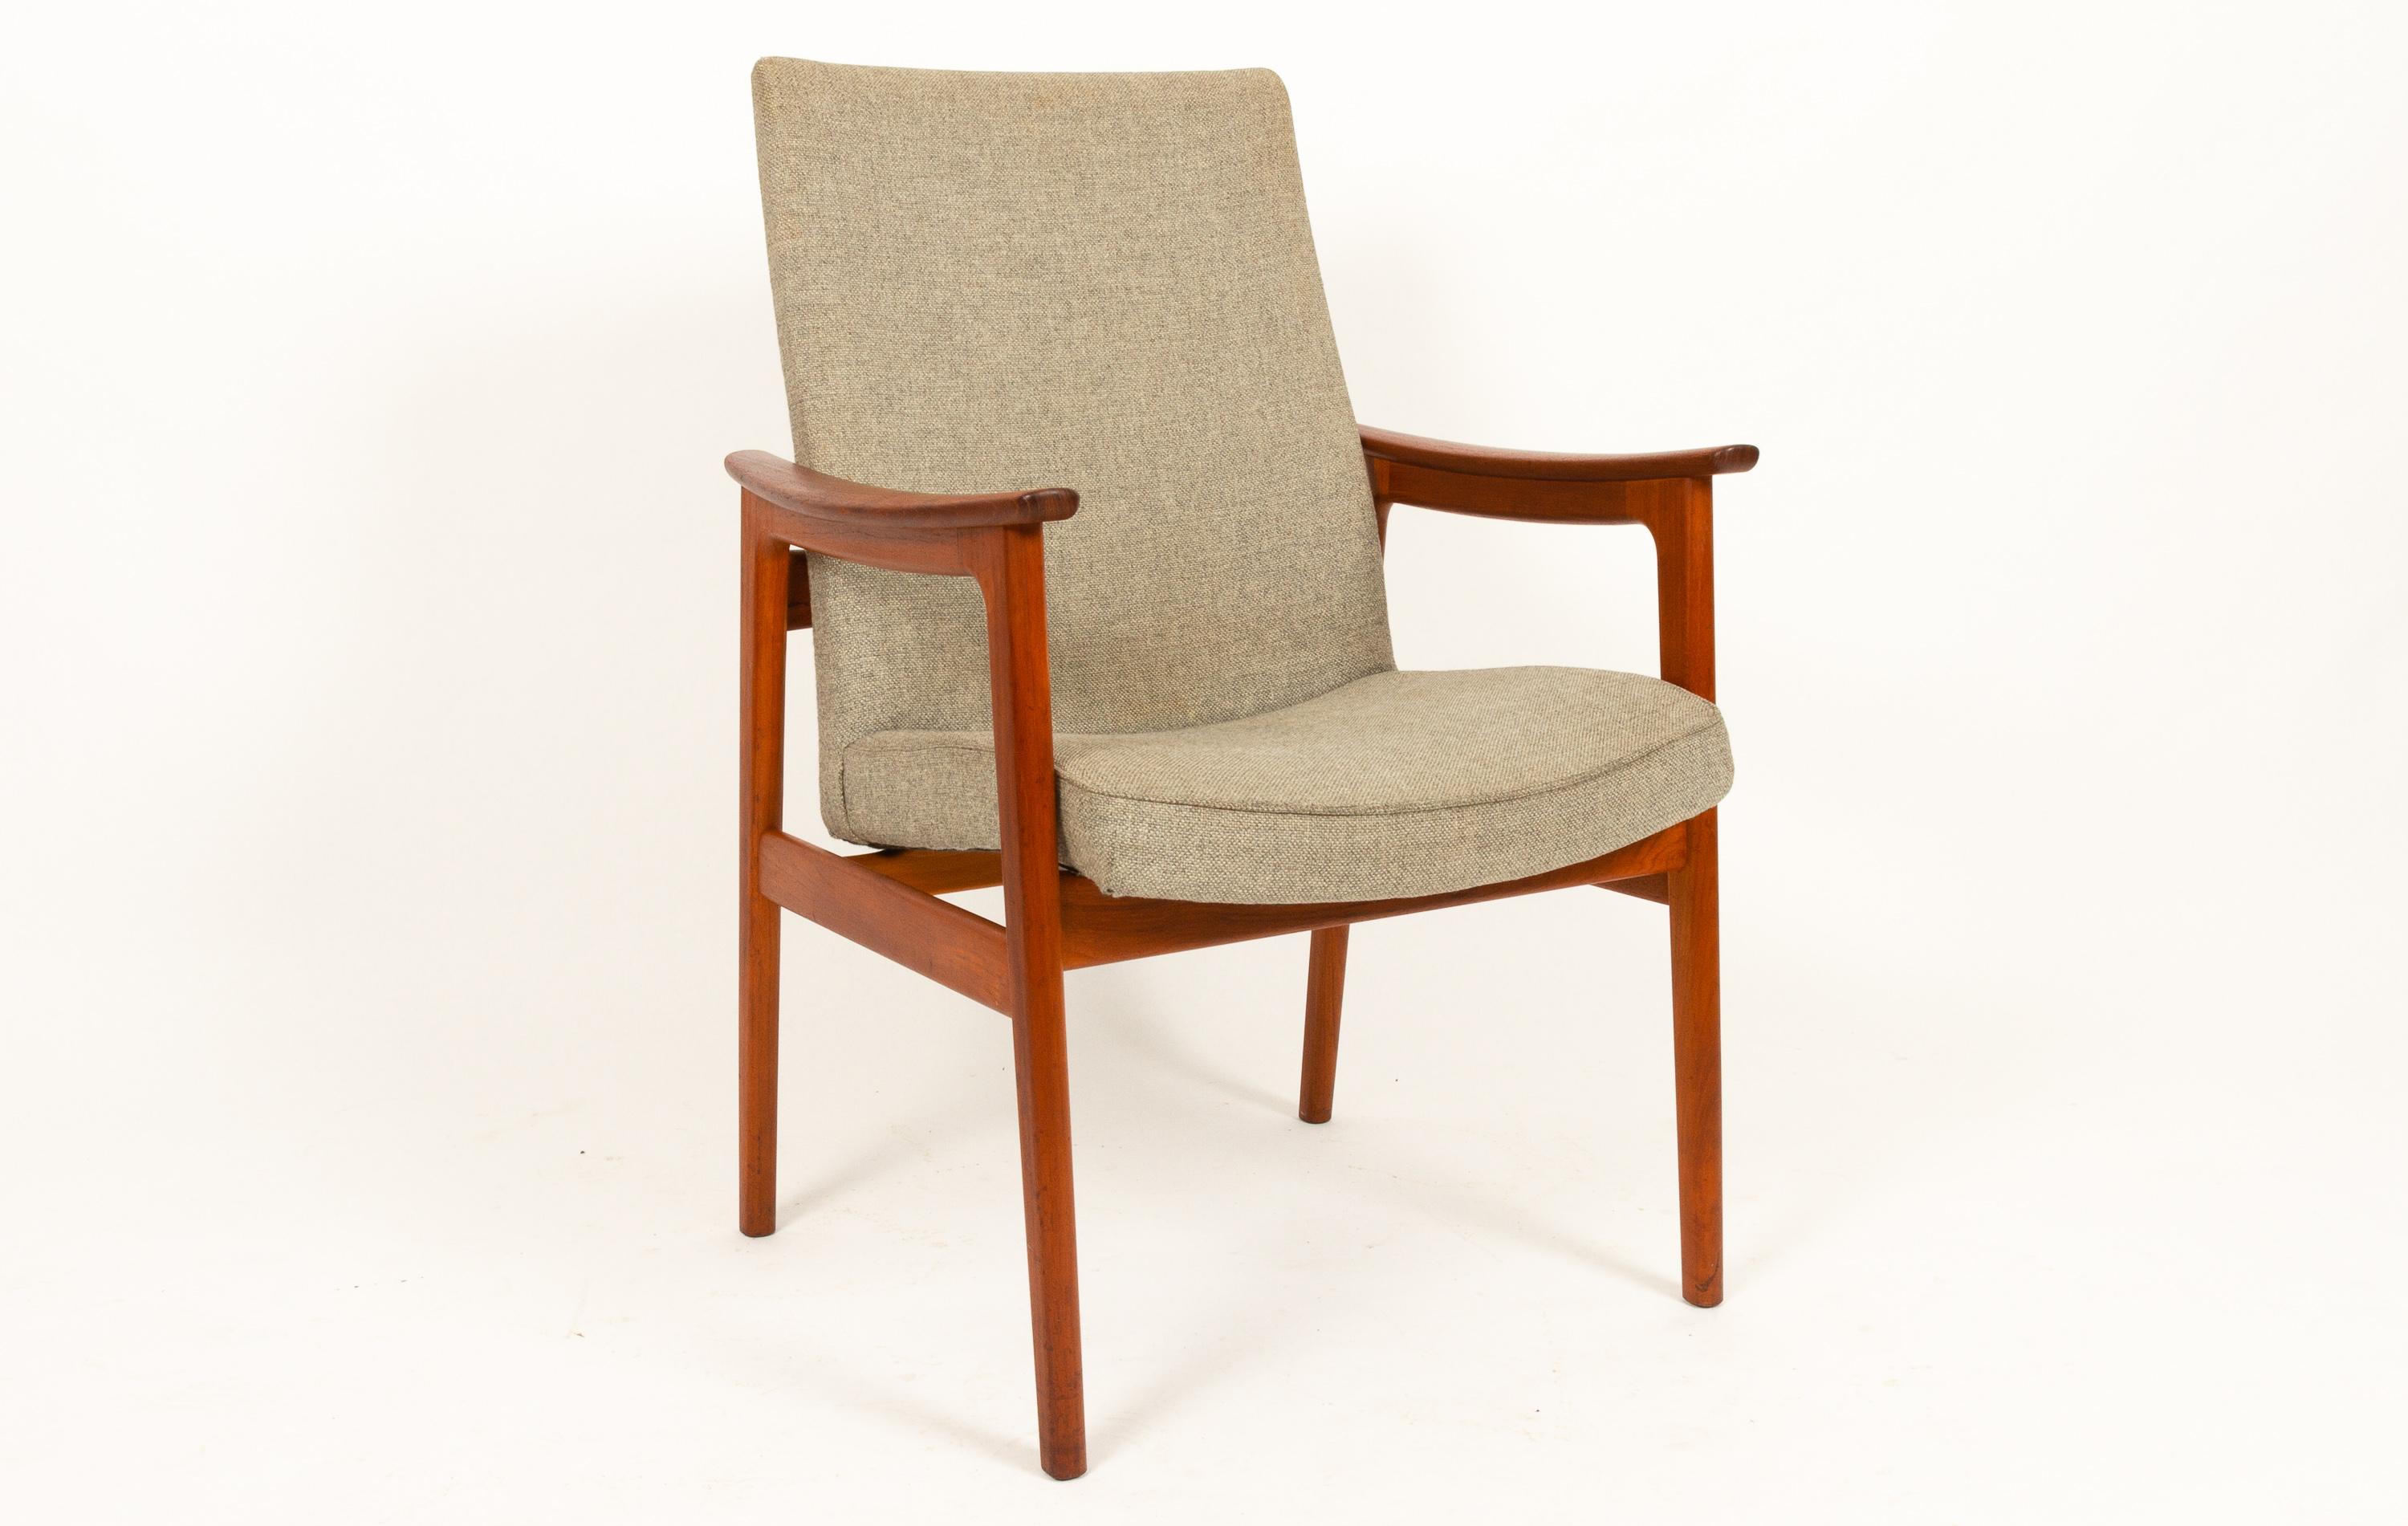 Vintage Danish armchair in teak and wool by Erik Kierkegaard for Høng Stolefabrik 1960s.
Very comfortable and elegant Mid-Century Modern armchair in solid teak with grey wool upholstery. Curved armrests and tapered legs. High back for excellent